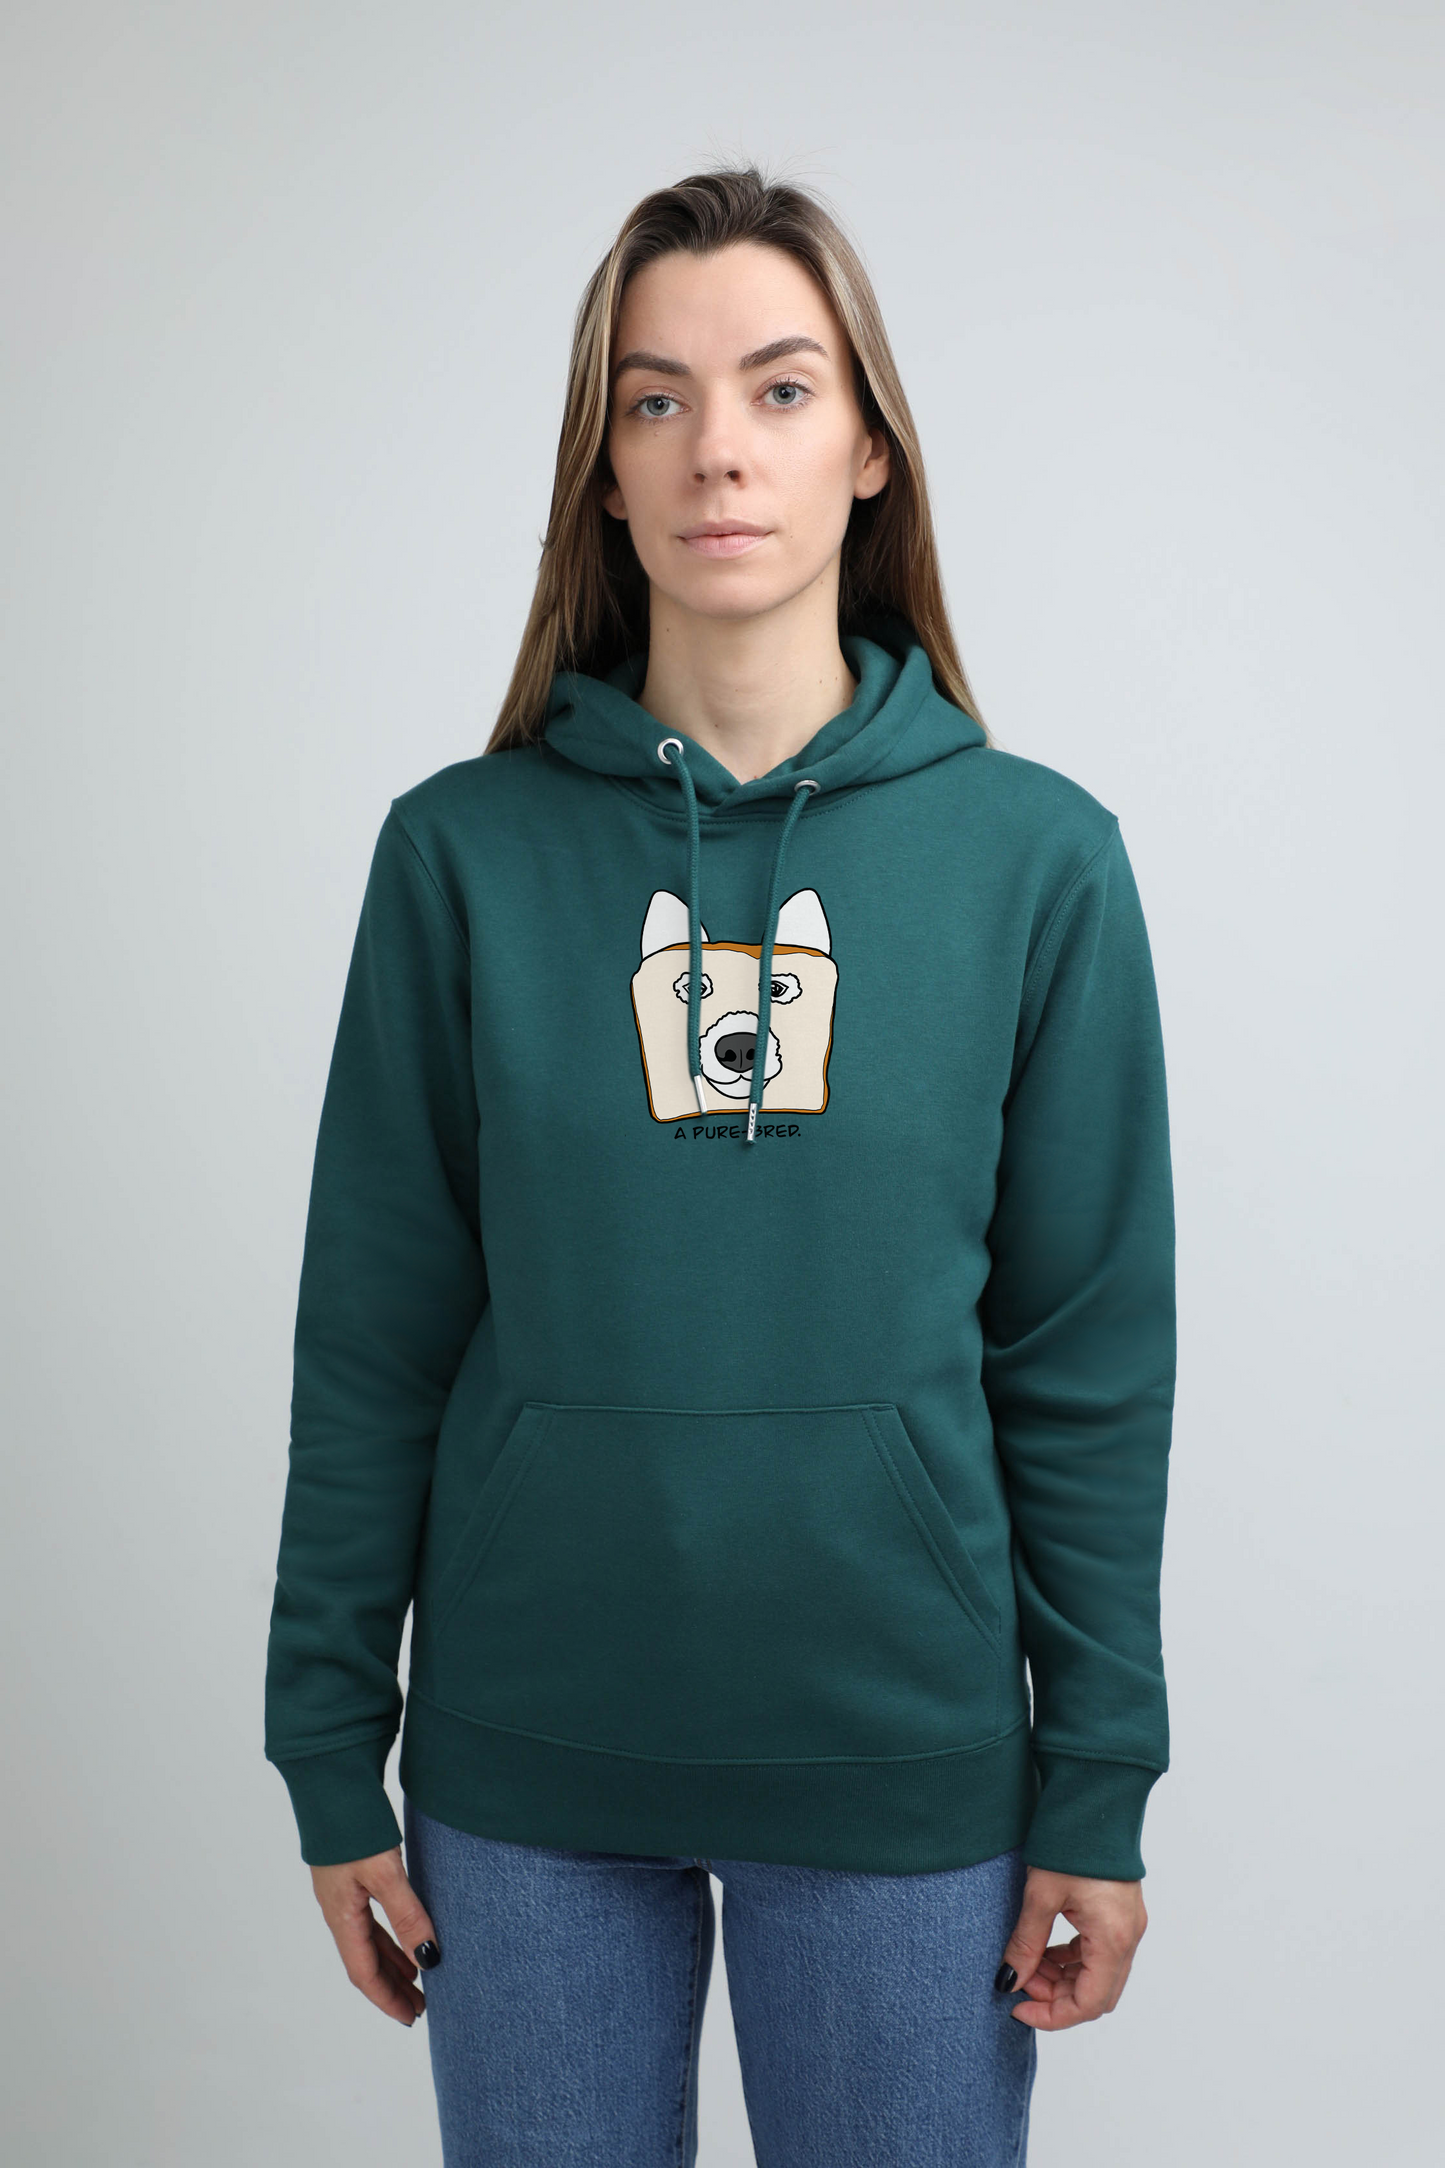 Pure-bred dog | Hoodie with dog. Regular fit | Unisex by My Wild Other